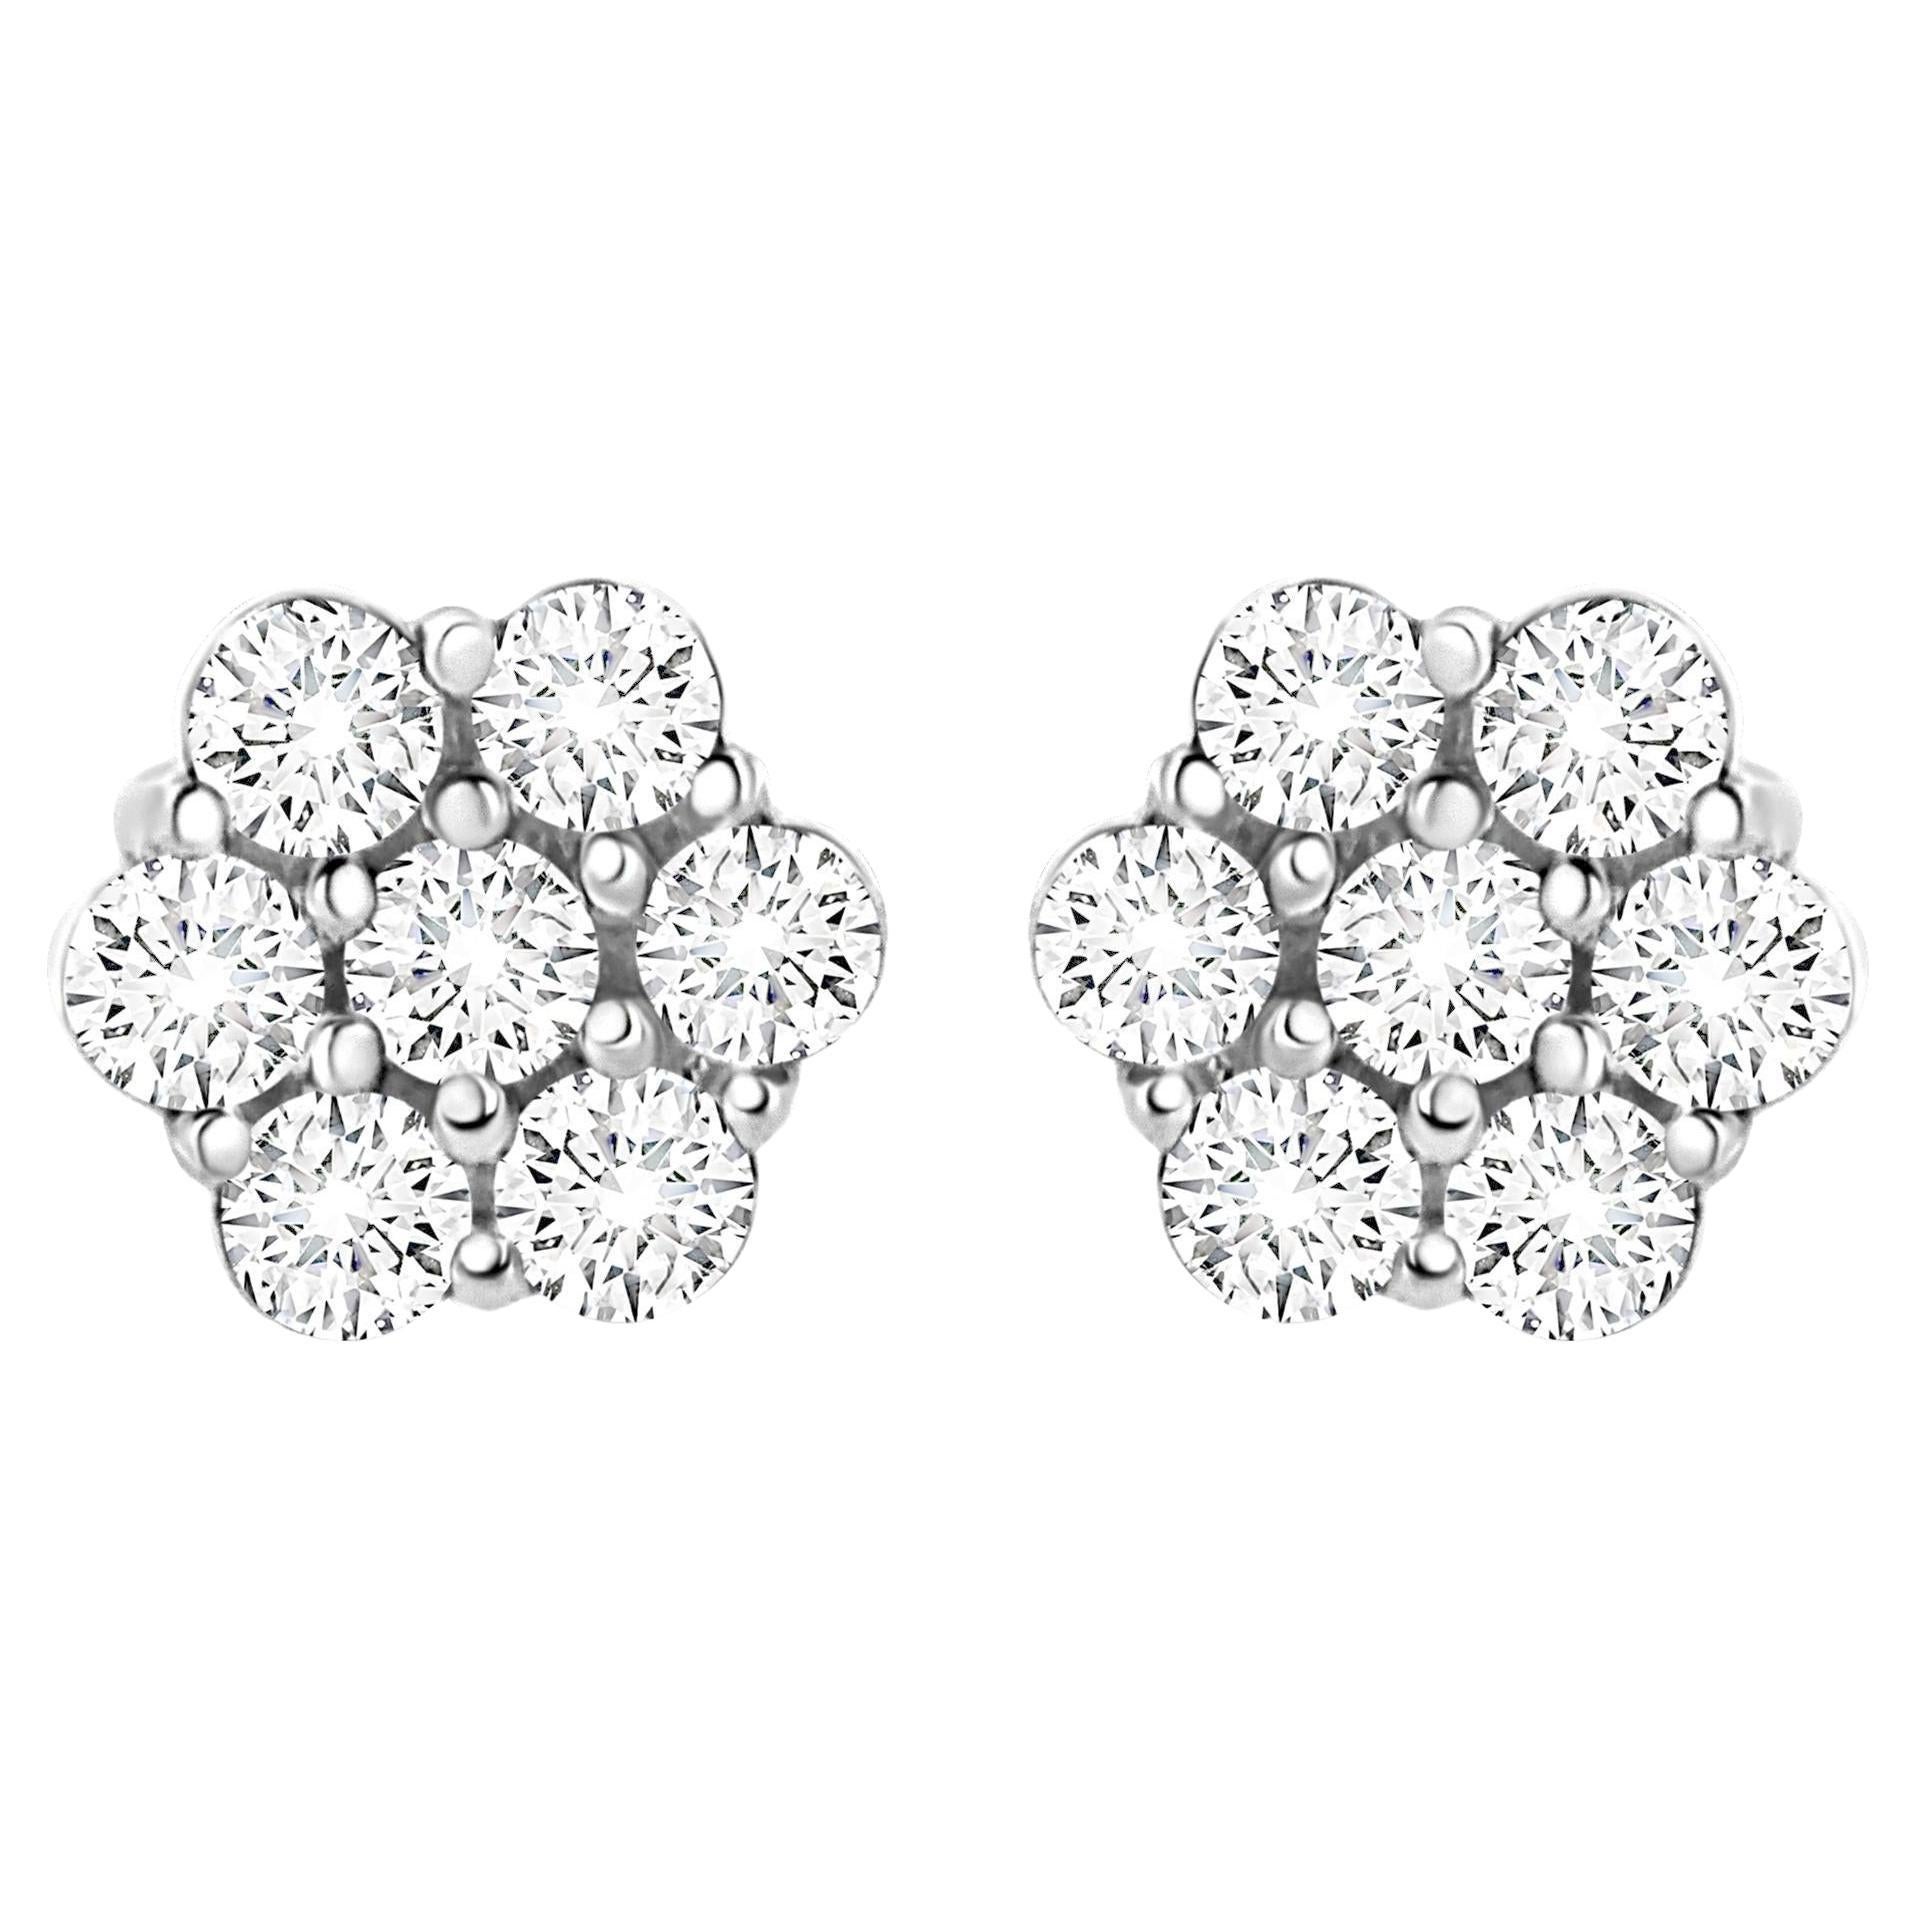 Diamond Cluster Stud Earrings Round Brilliant Cut 0.5 Carats 14K White Gold